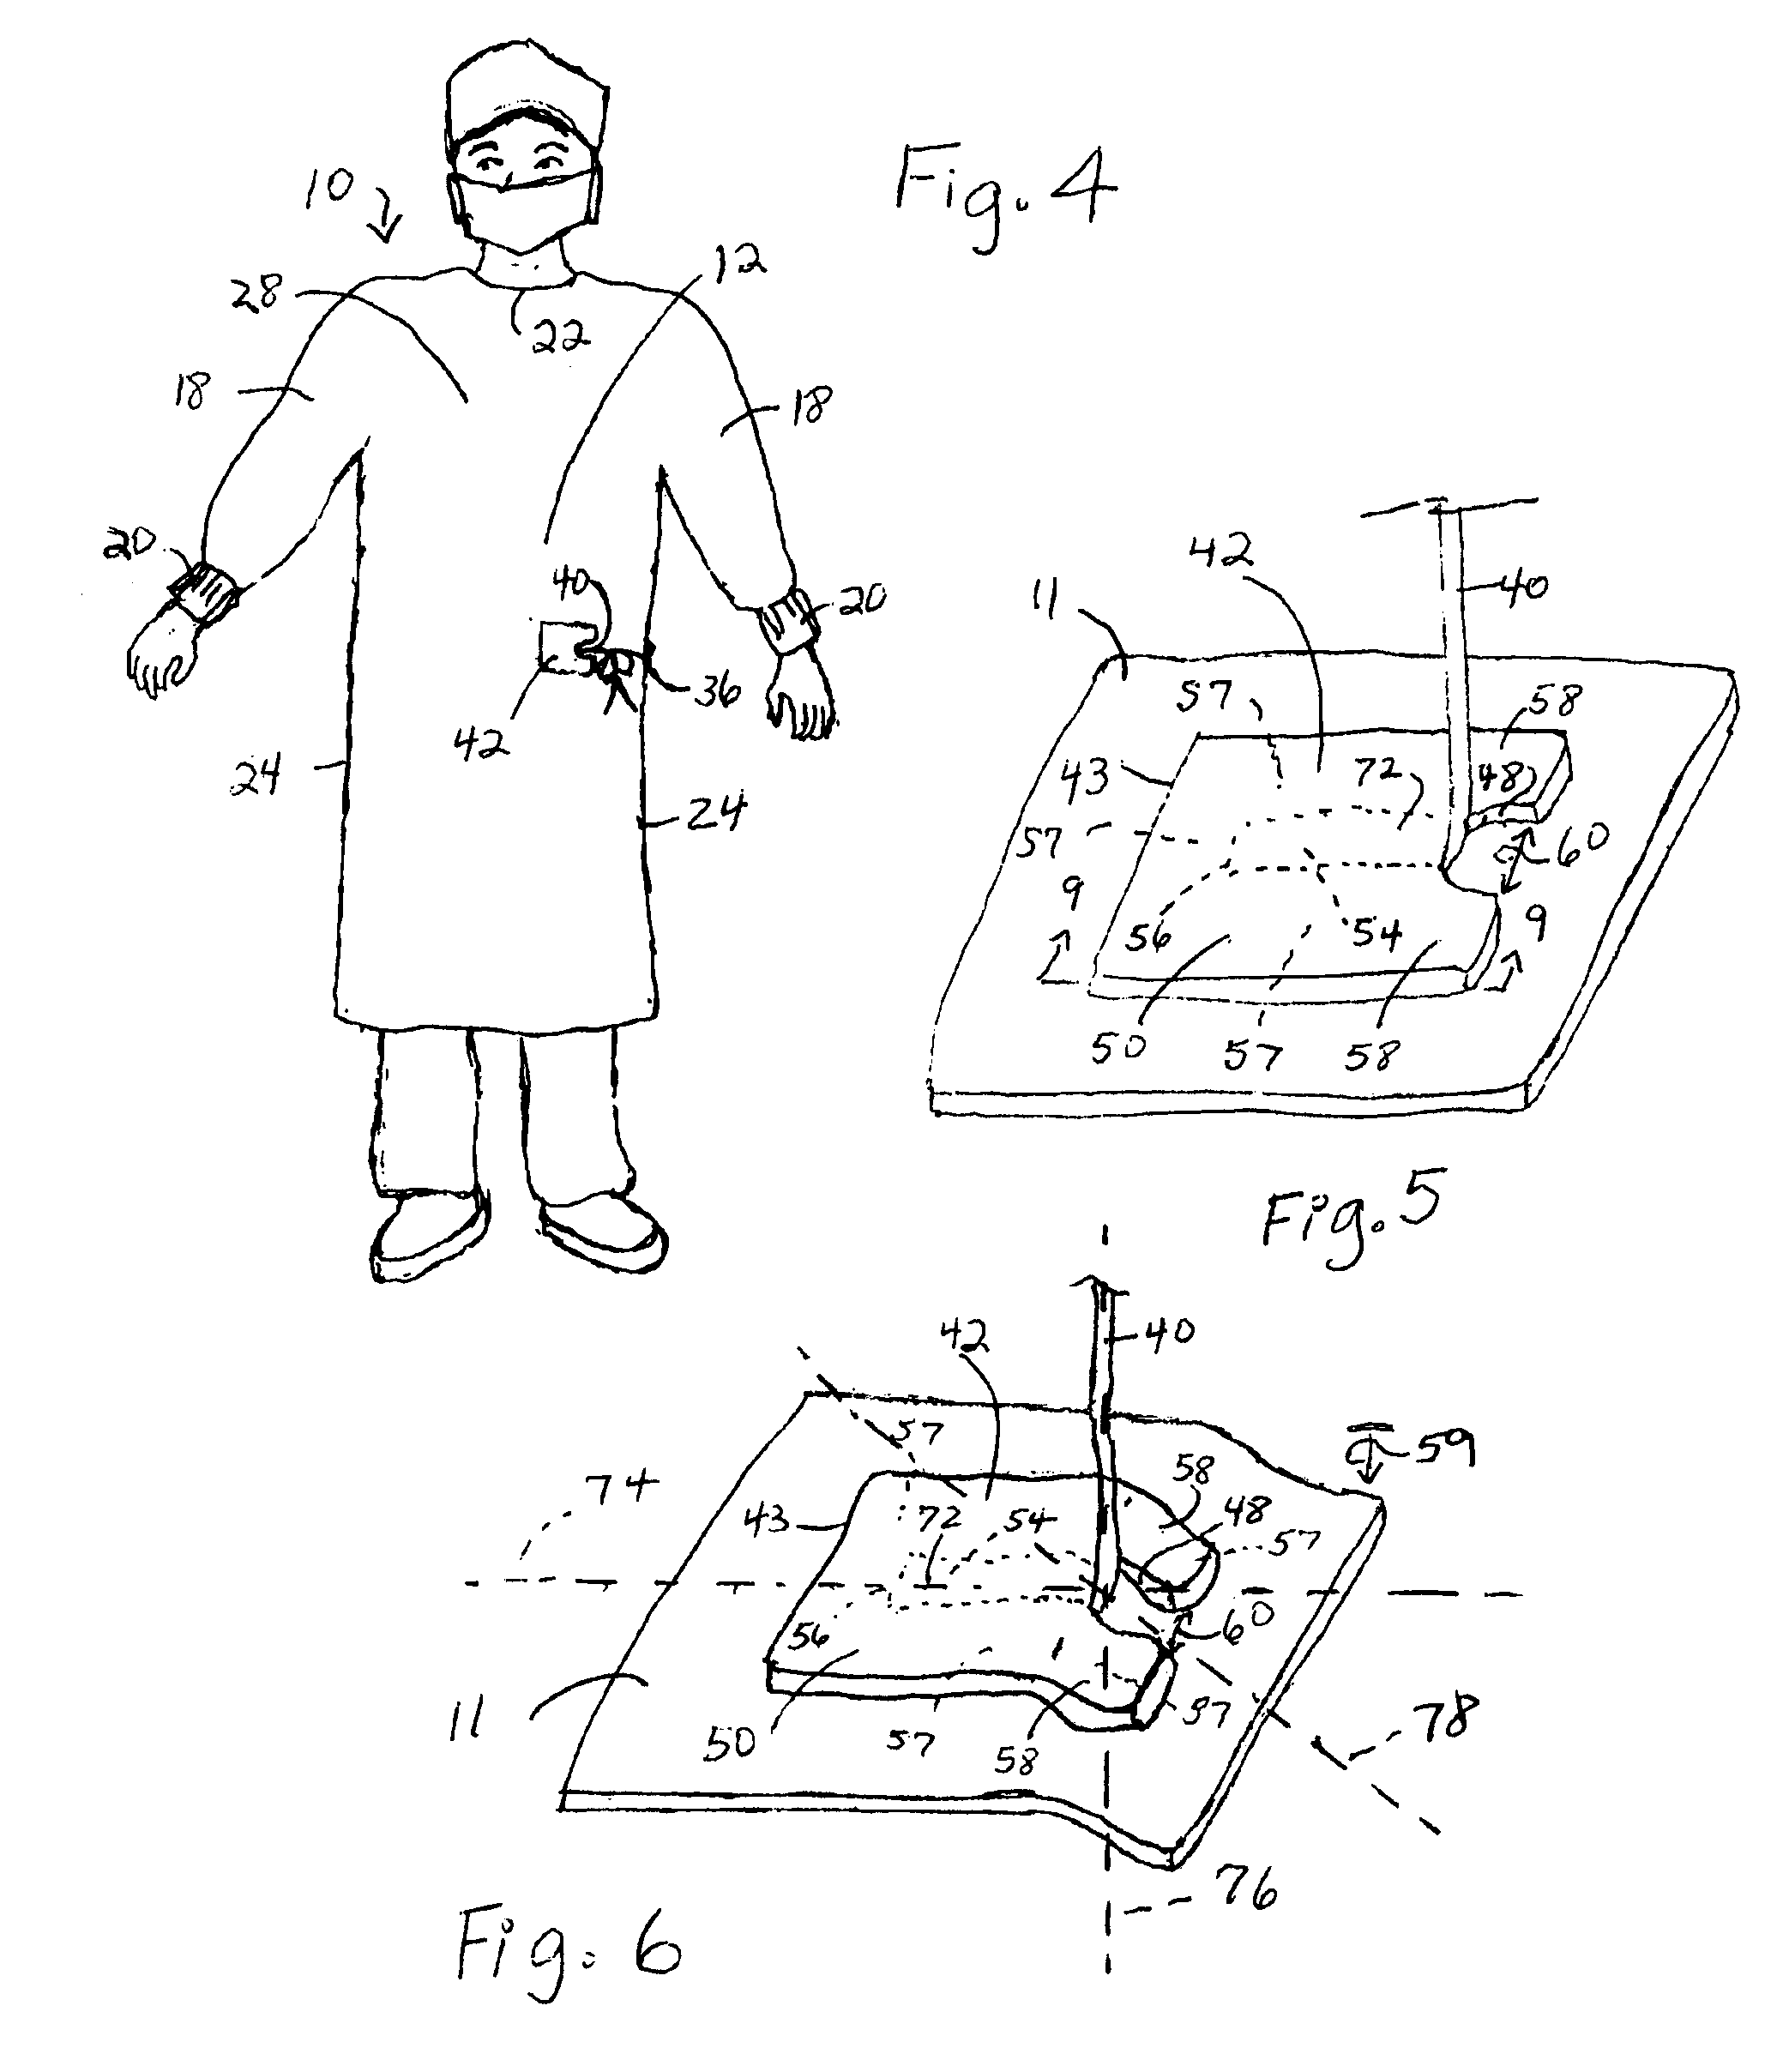 Patch For Securing A Surgical Gown Tie